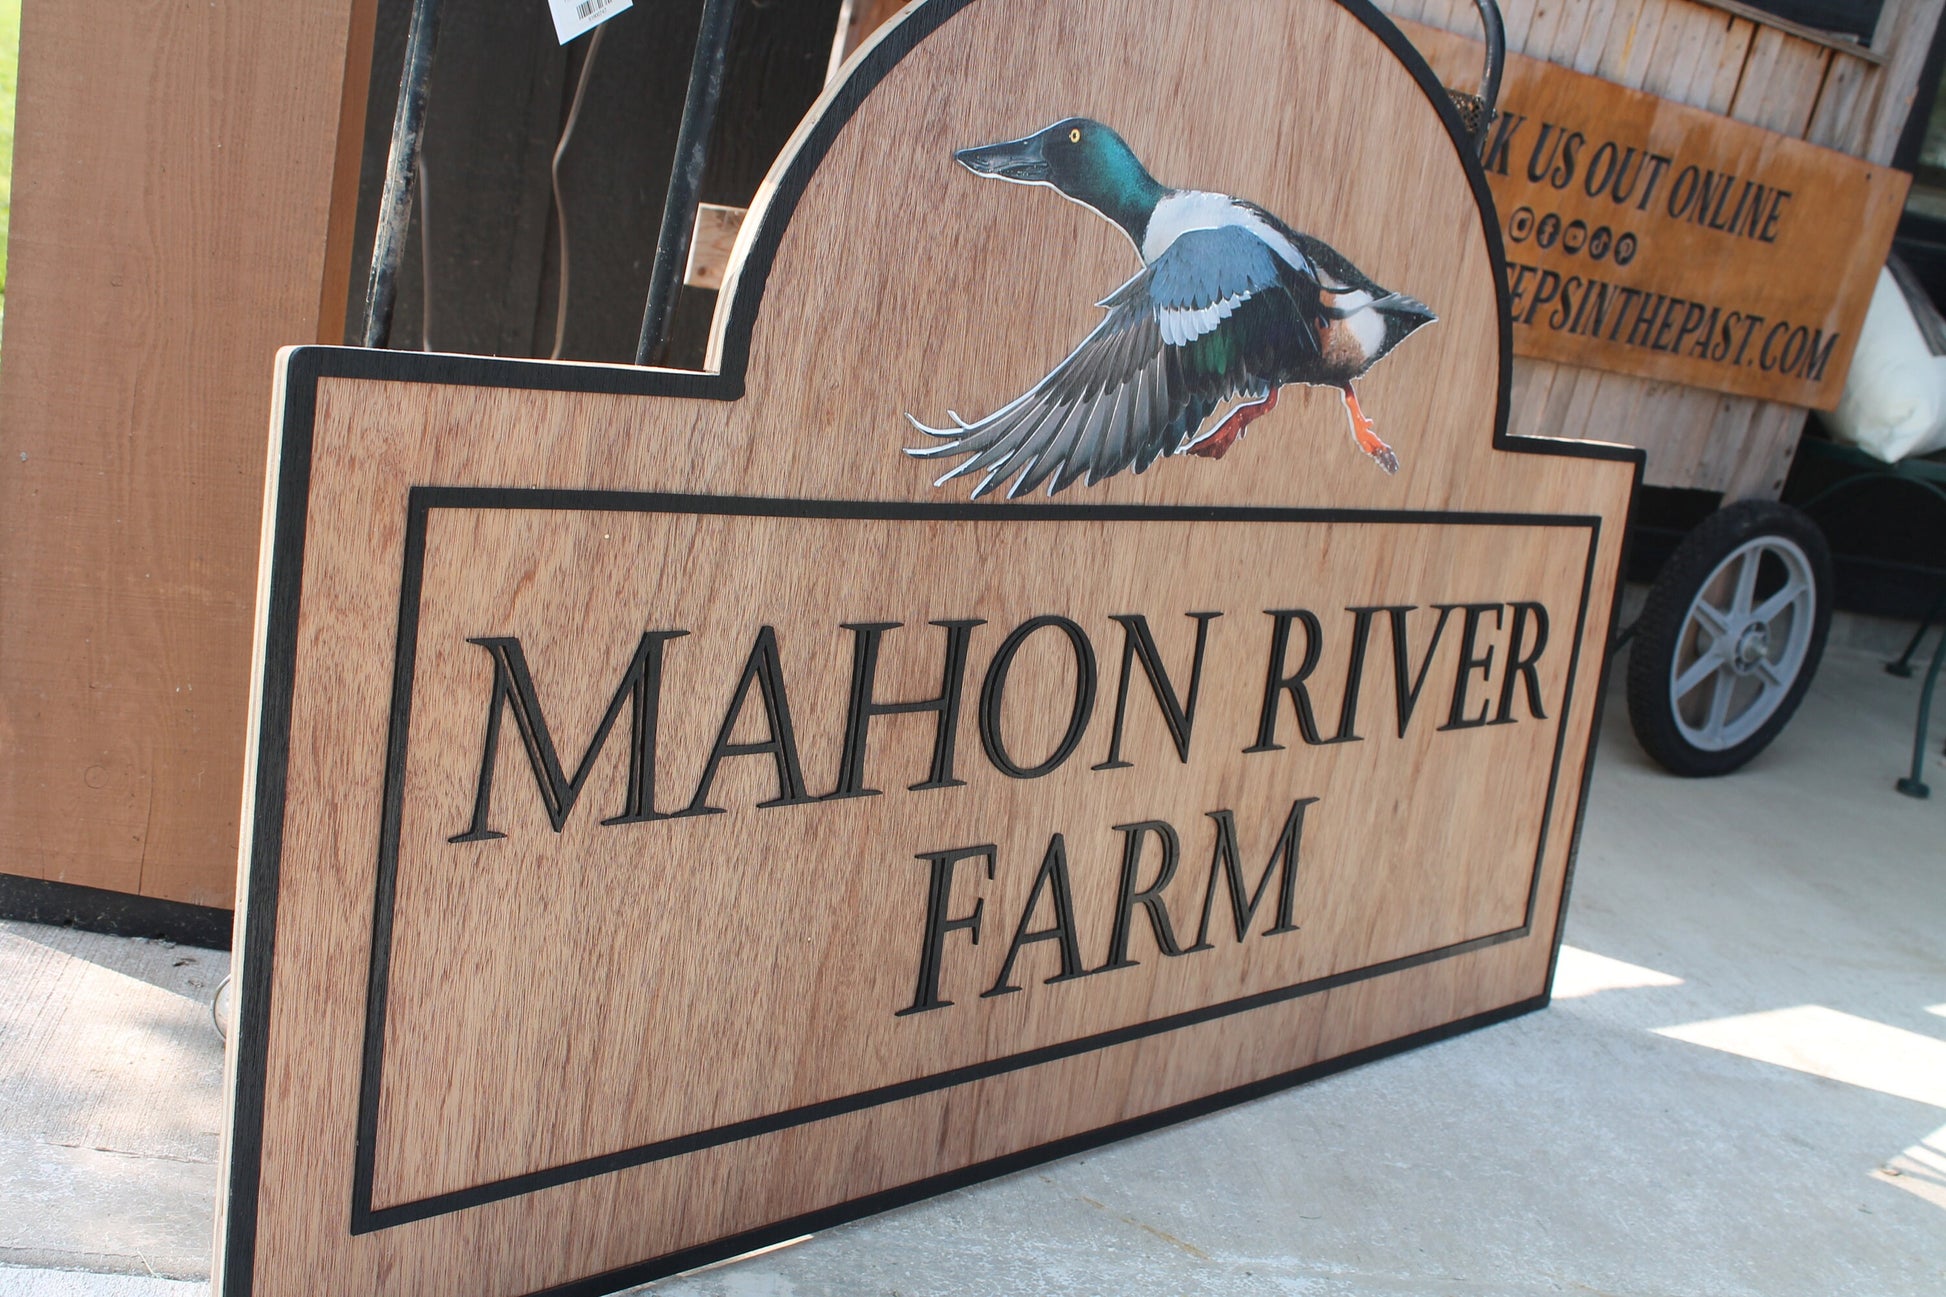 Personalized River Farm Sign Woodland Duck Bird Poultry Hobby Farm Large Custom Business Sign Business Logo Wood 3D Large Mahon Hunting